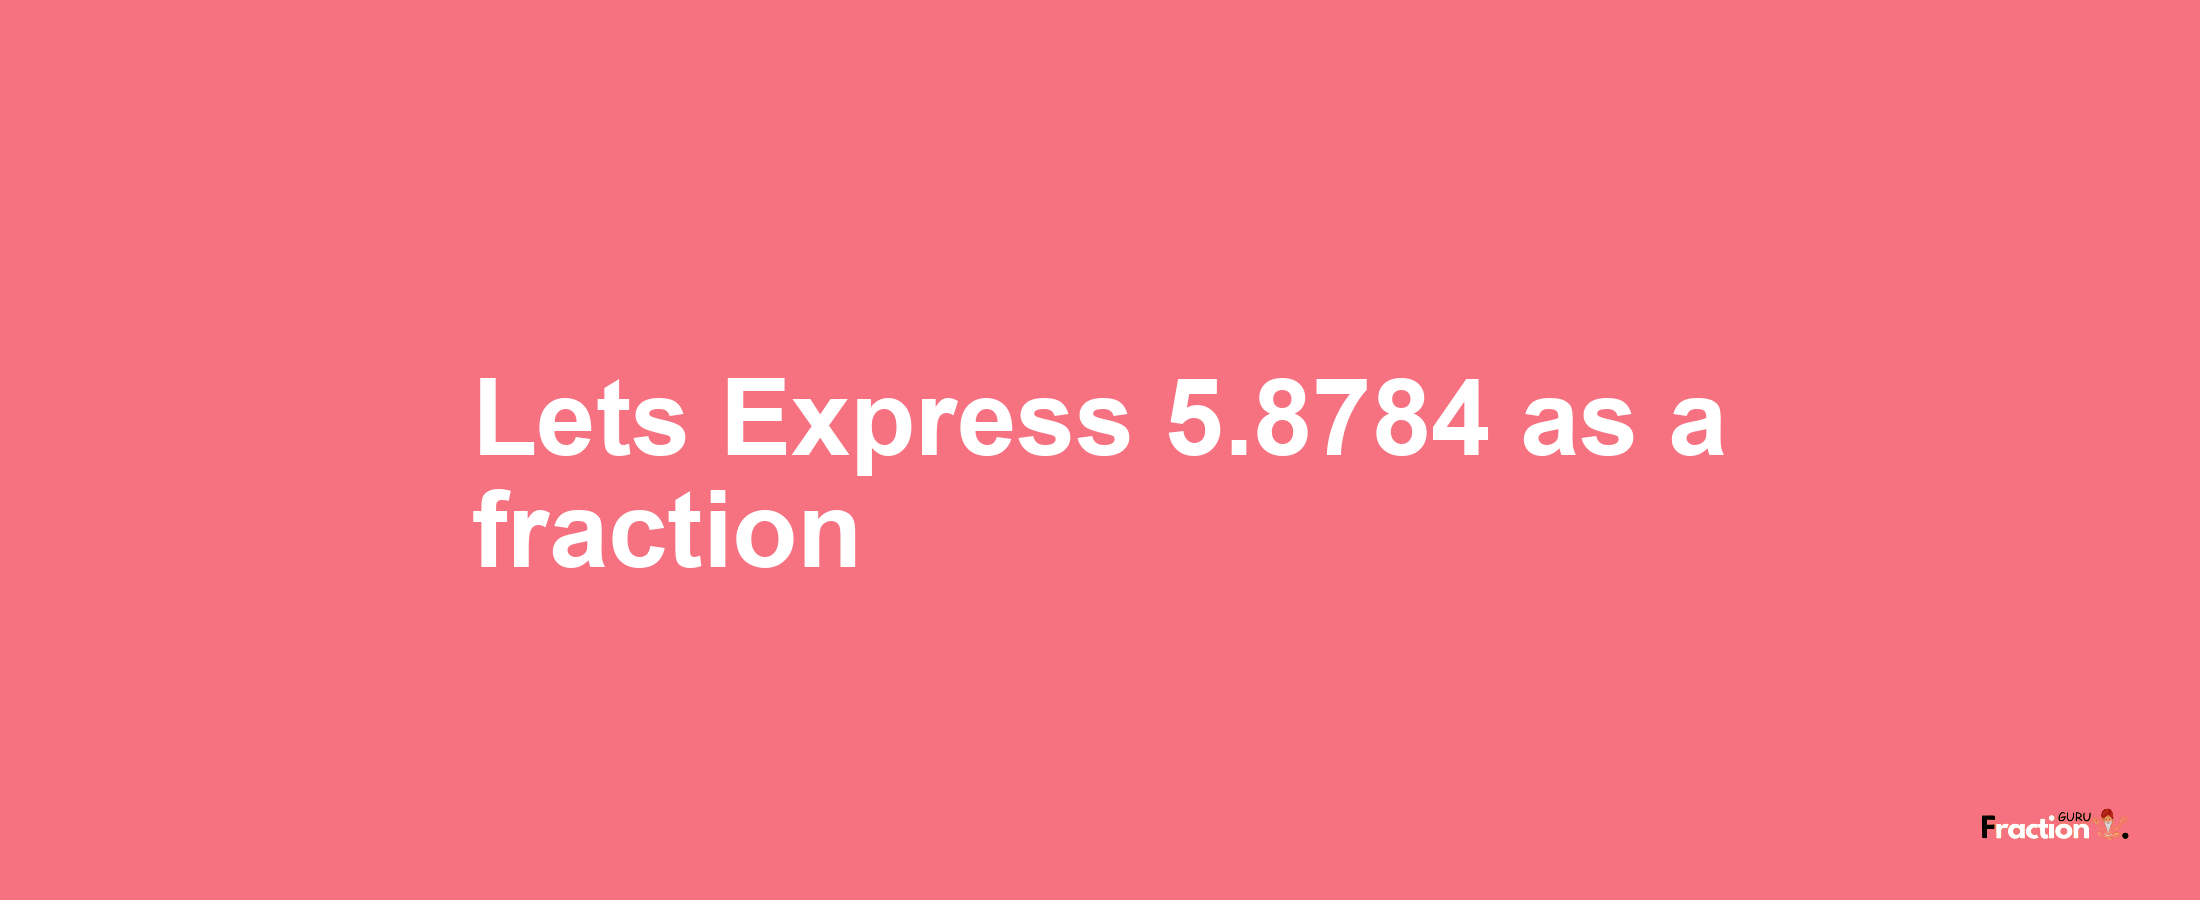 Lets Express 5.8784 as afraction